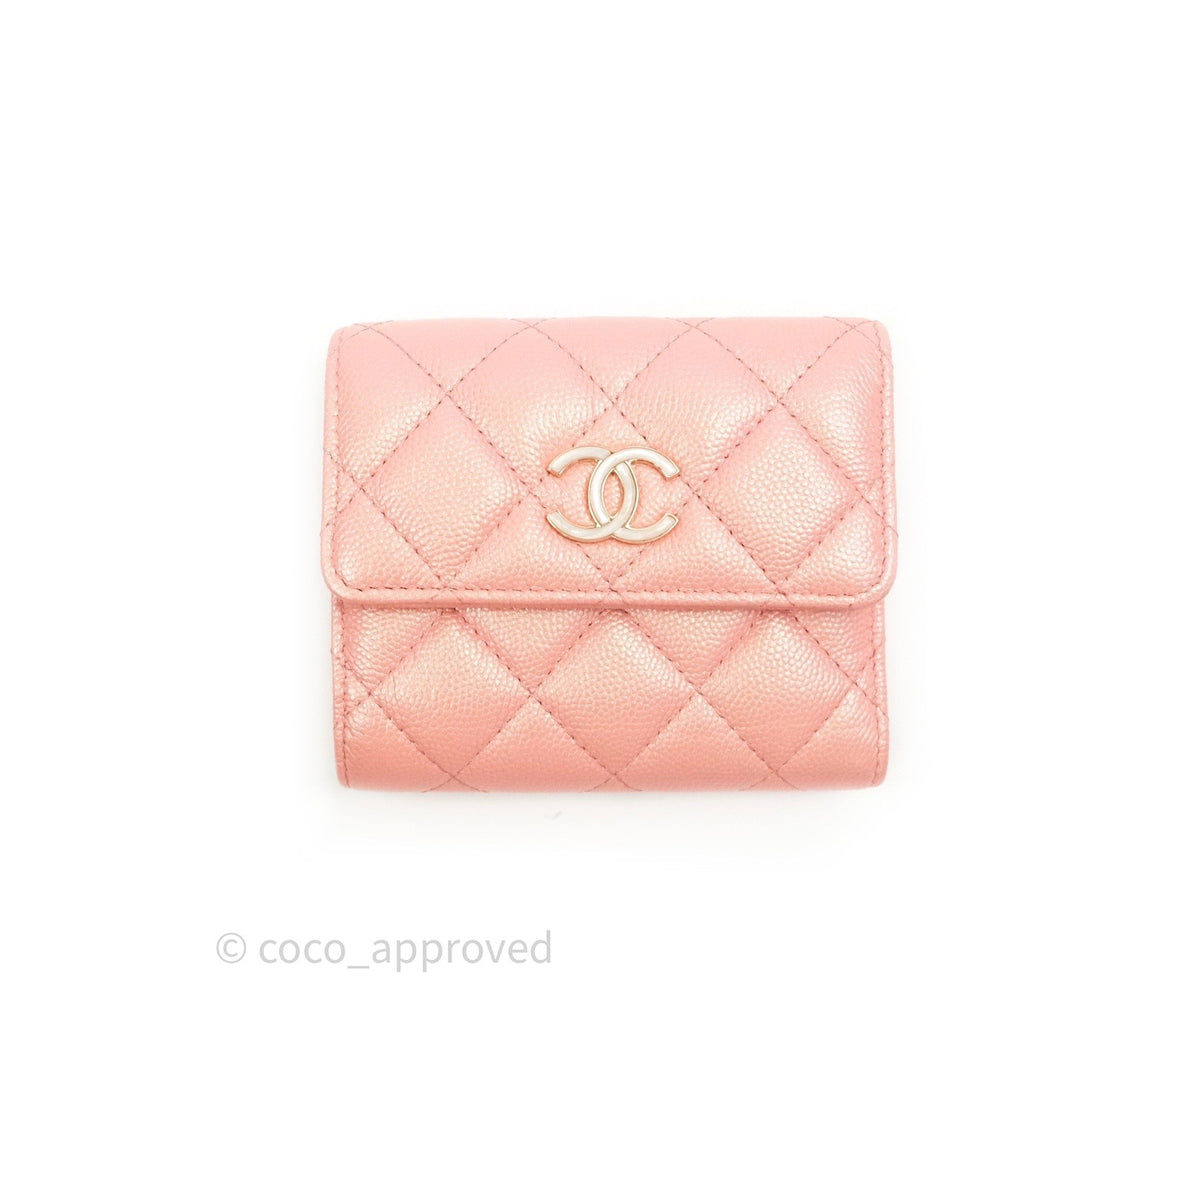 Chanel Classic Small Compact Wallet Iridescent Pink Large CC Hardware